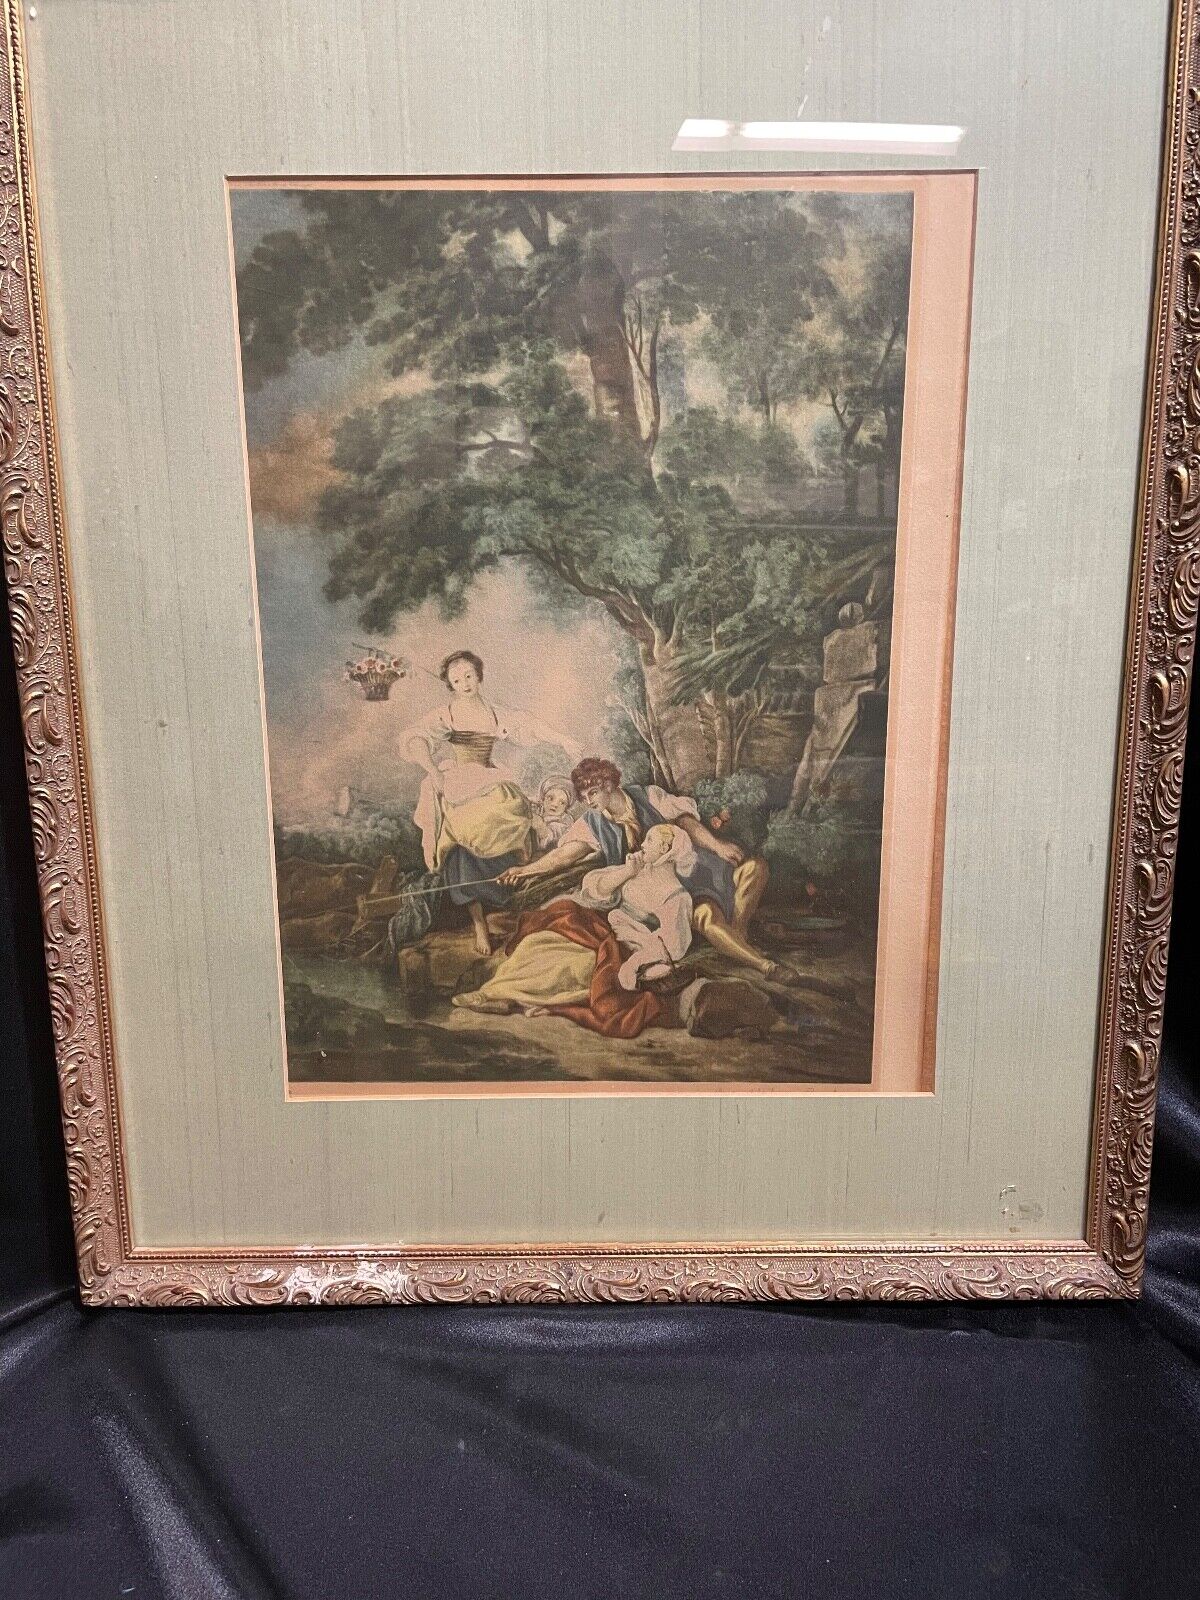 Bouchar framed prints - Circa 1920-30 - “Fishing Party” & “Fortune Teller” NYGS